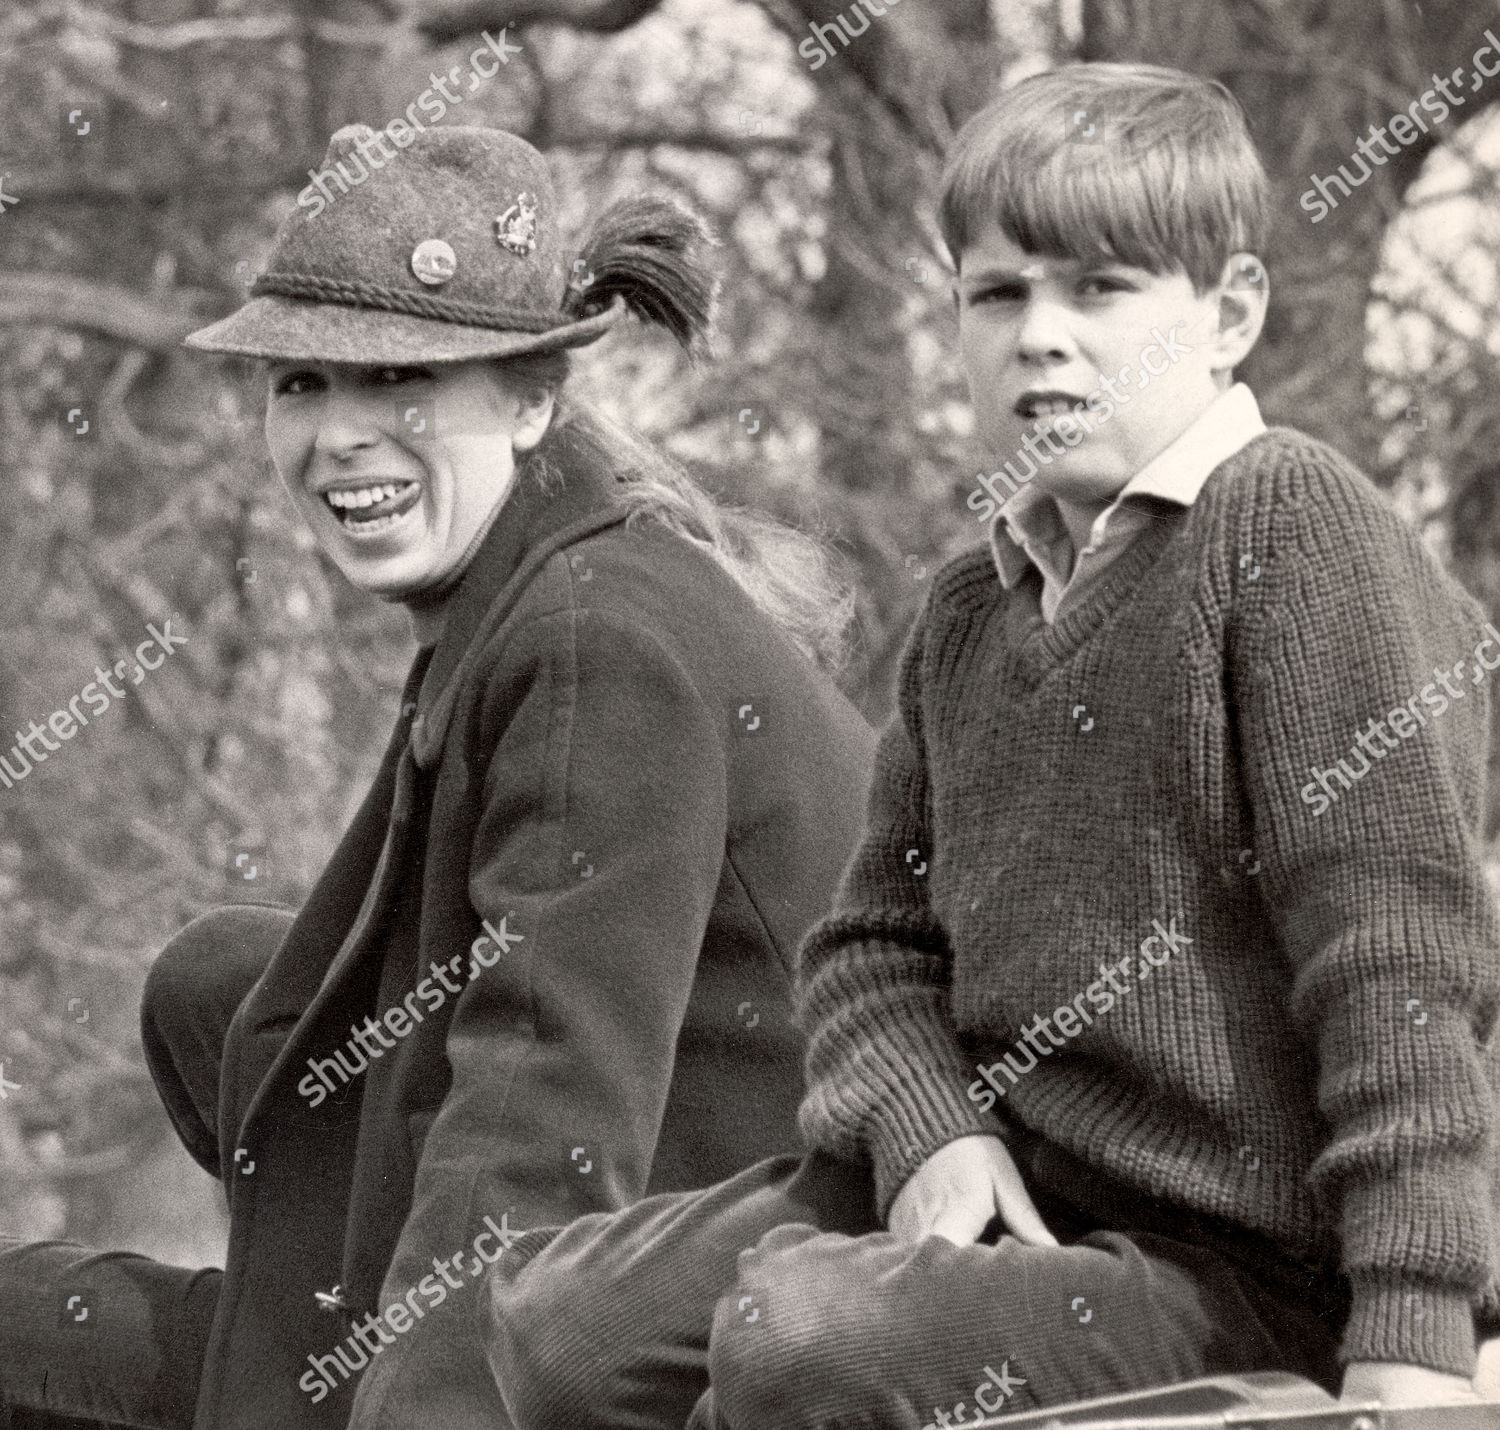 princess-anne-now-princess-royal-apil-1969-princess-anne-is-pictured-with-prince-andrew-watching-the-events-of-the-three-day-horse-trials-at-badminton-gloucestershire-the-duke-of-beauforts-estate-royalty-shutterstock-editorial-890822a.jpg